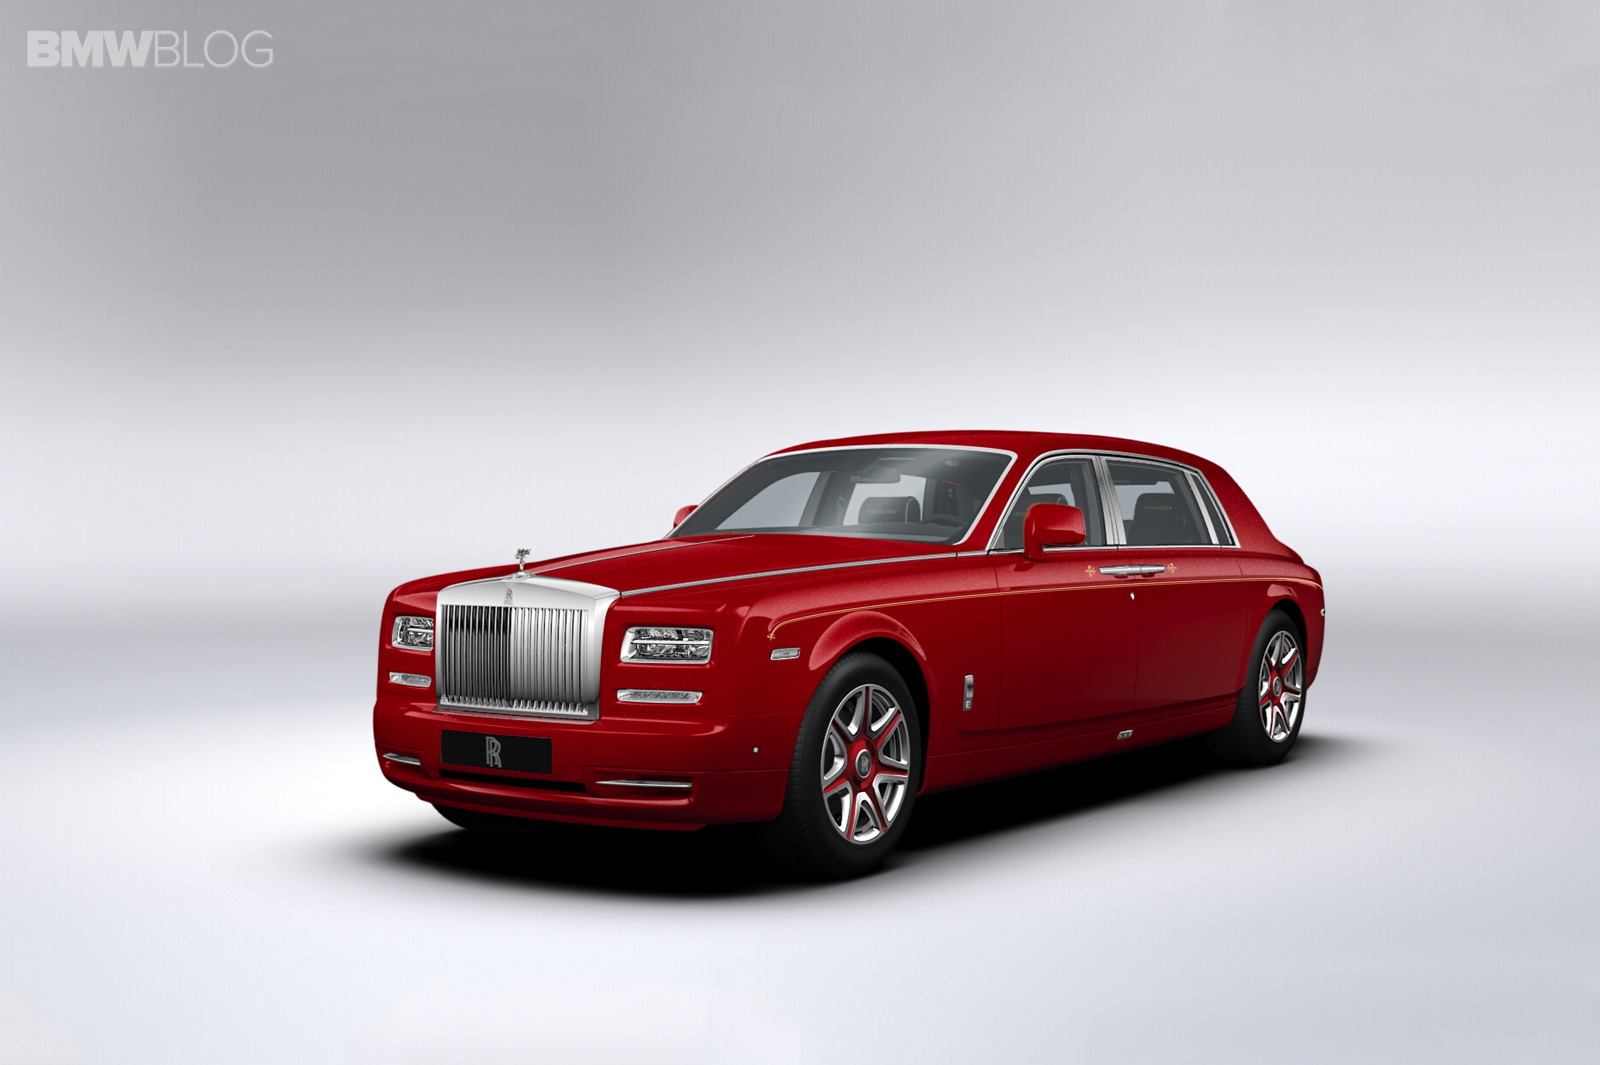 Rolls royce bought by bmw #4